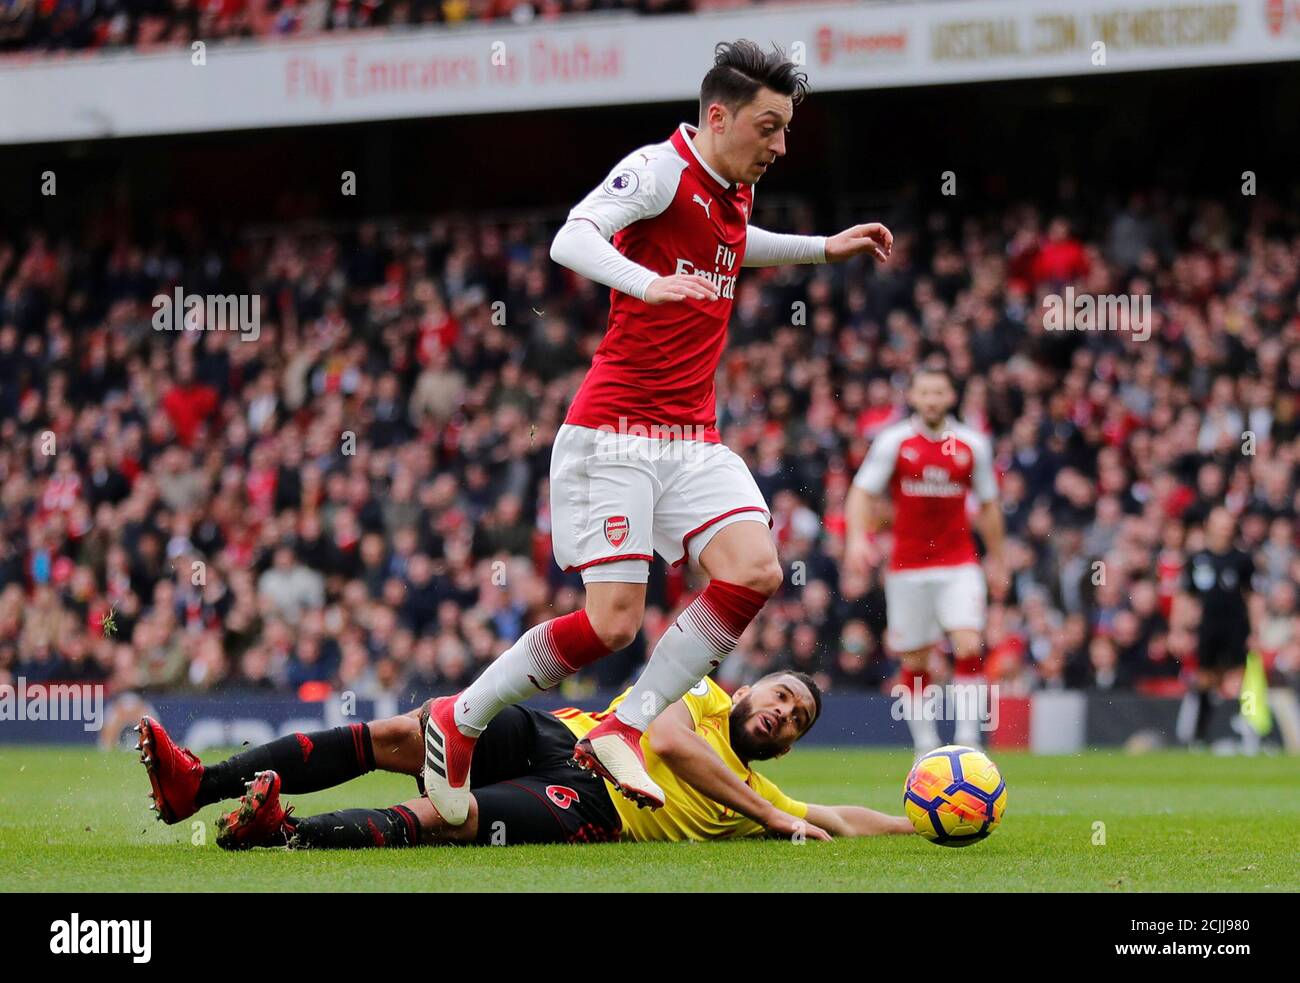 Soccer Football - Premier League - Arsenal vs Watford - Emirates Stadium, London, Britain - March 11, 2018   Arsenal's Mesut Ozil in action with Watford's Adrian Mariappa    REUTERS/Eddie Keogh    EDITORIAL USE ONLY. No use with unauthorized audio, video, data, fixture lists, club/league logos or "live" services. Online in-match use limited to 75 images, no video emulation. No use in betting, games or single club/league/player publications.  Please contact your account representative for further details. Stock Photo